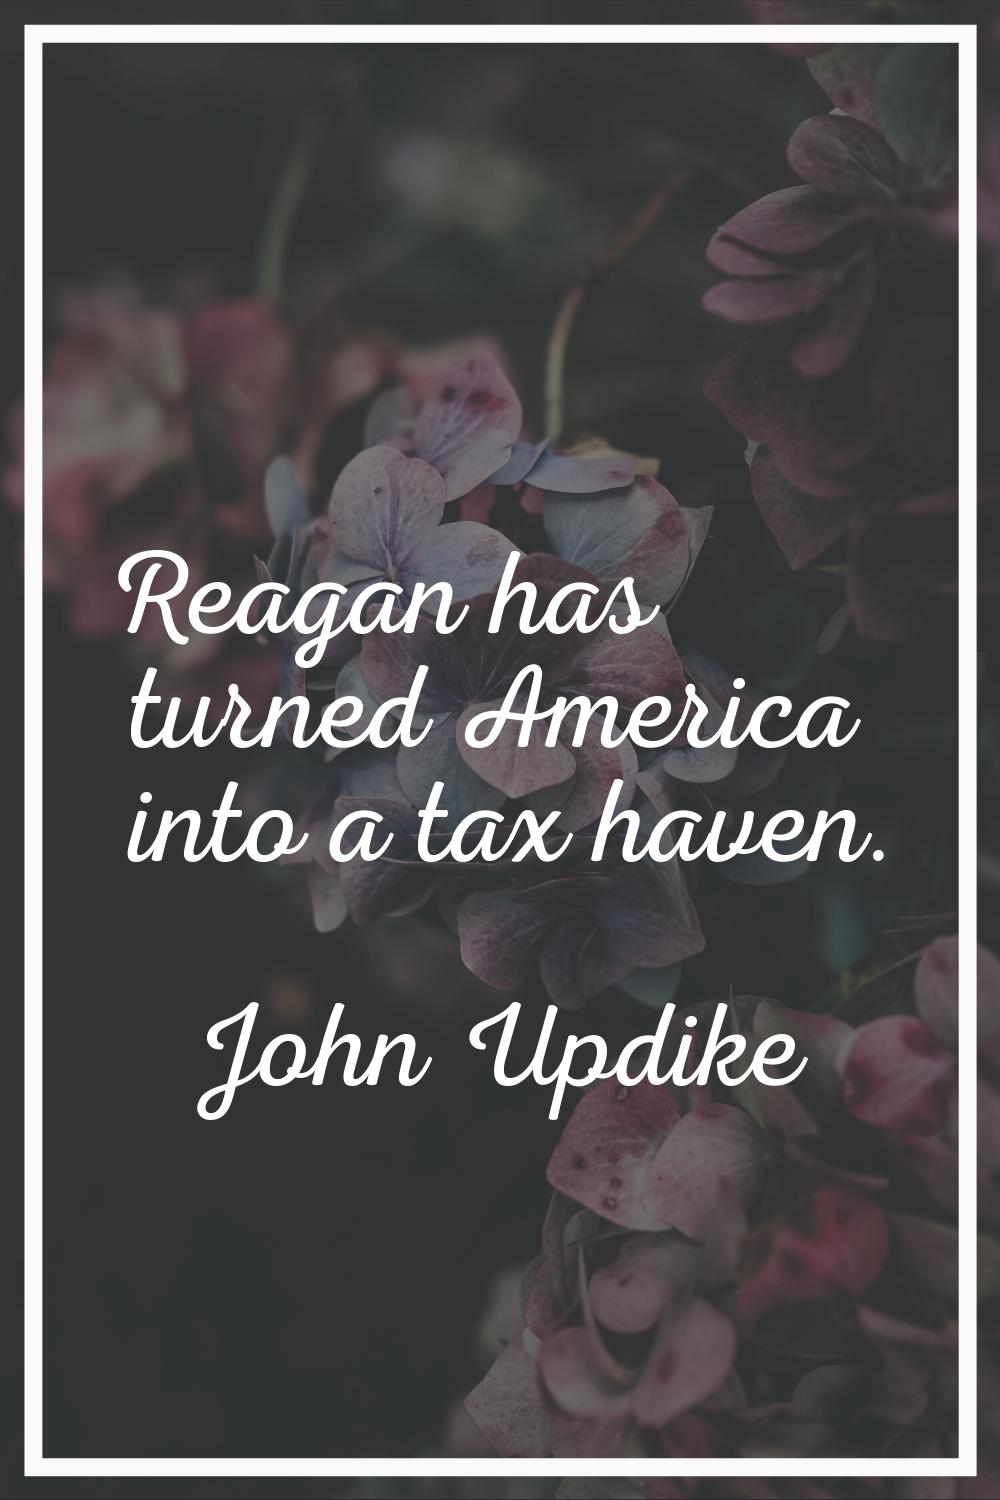 Reagan has turned America into a tax haven.